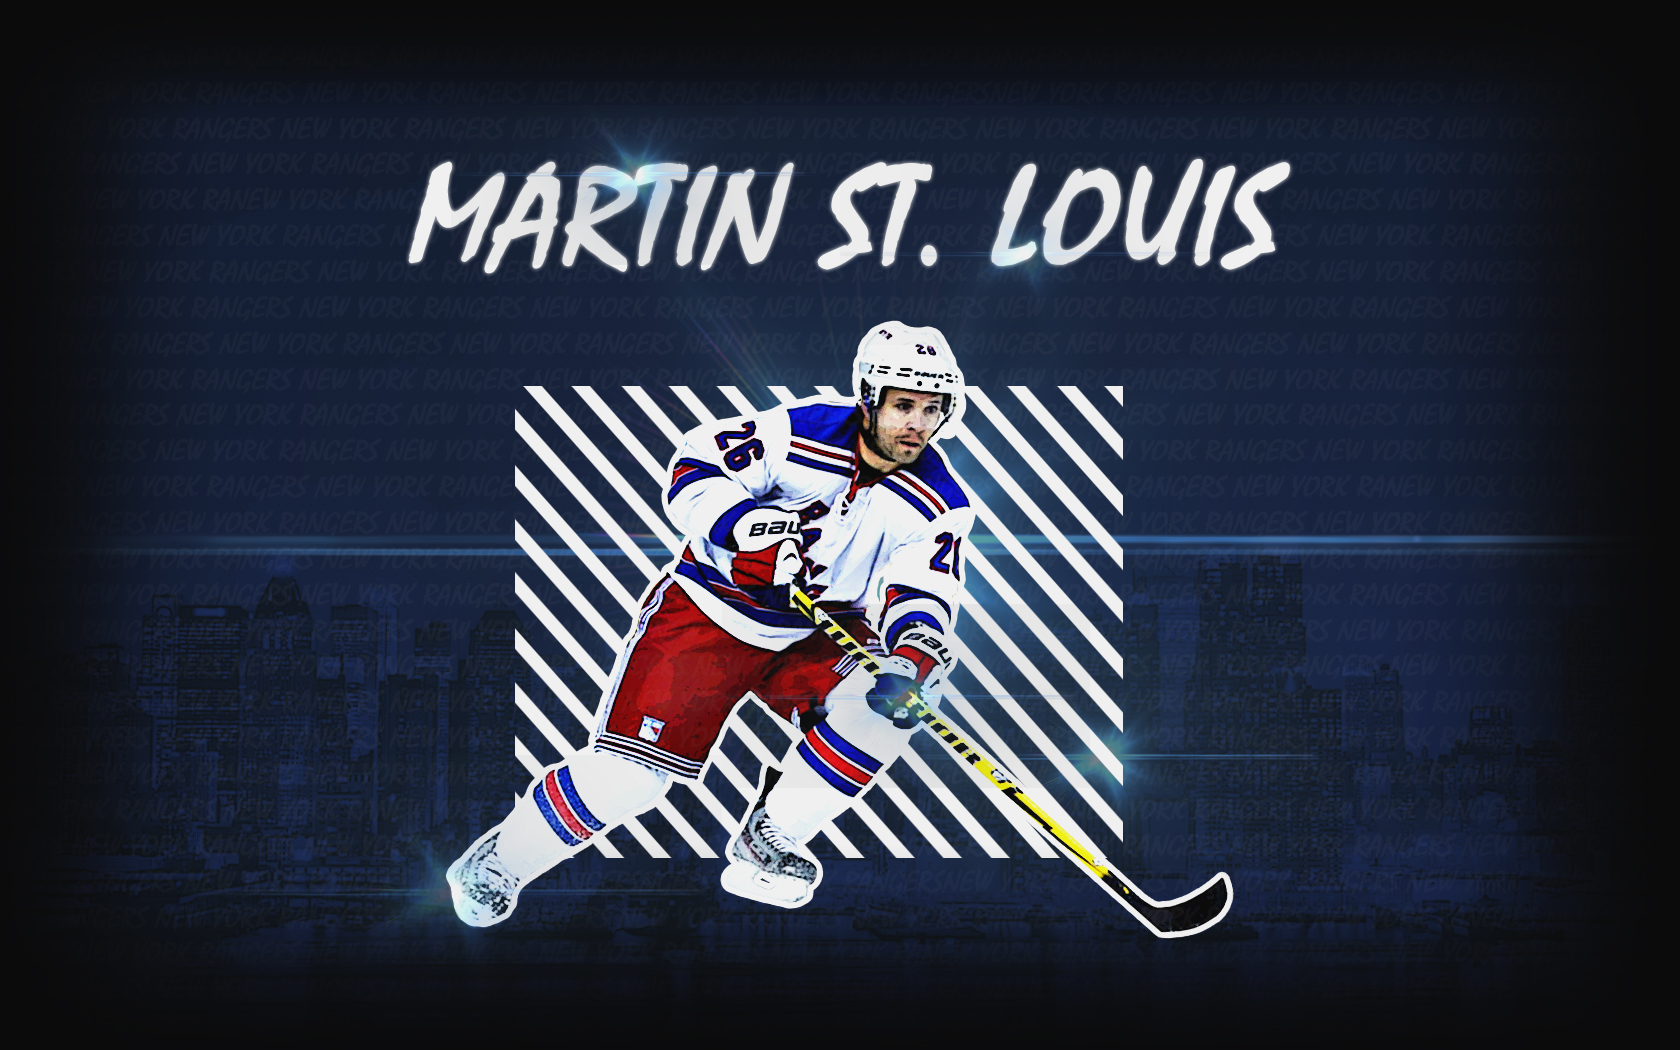 An NHL wallpaper featuring Martin St Louis of the New York Rangers